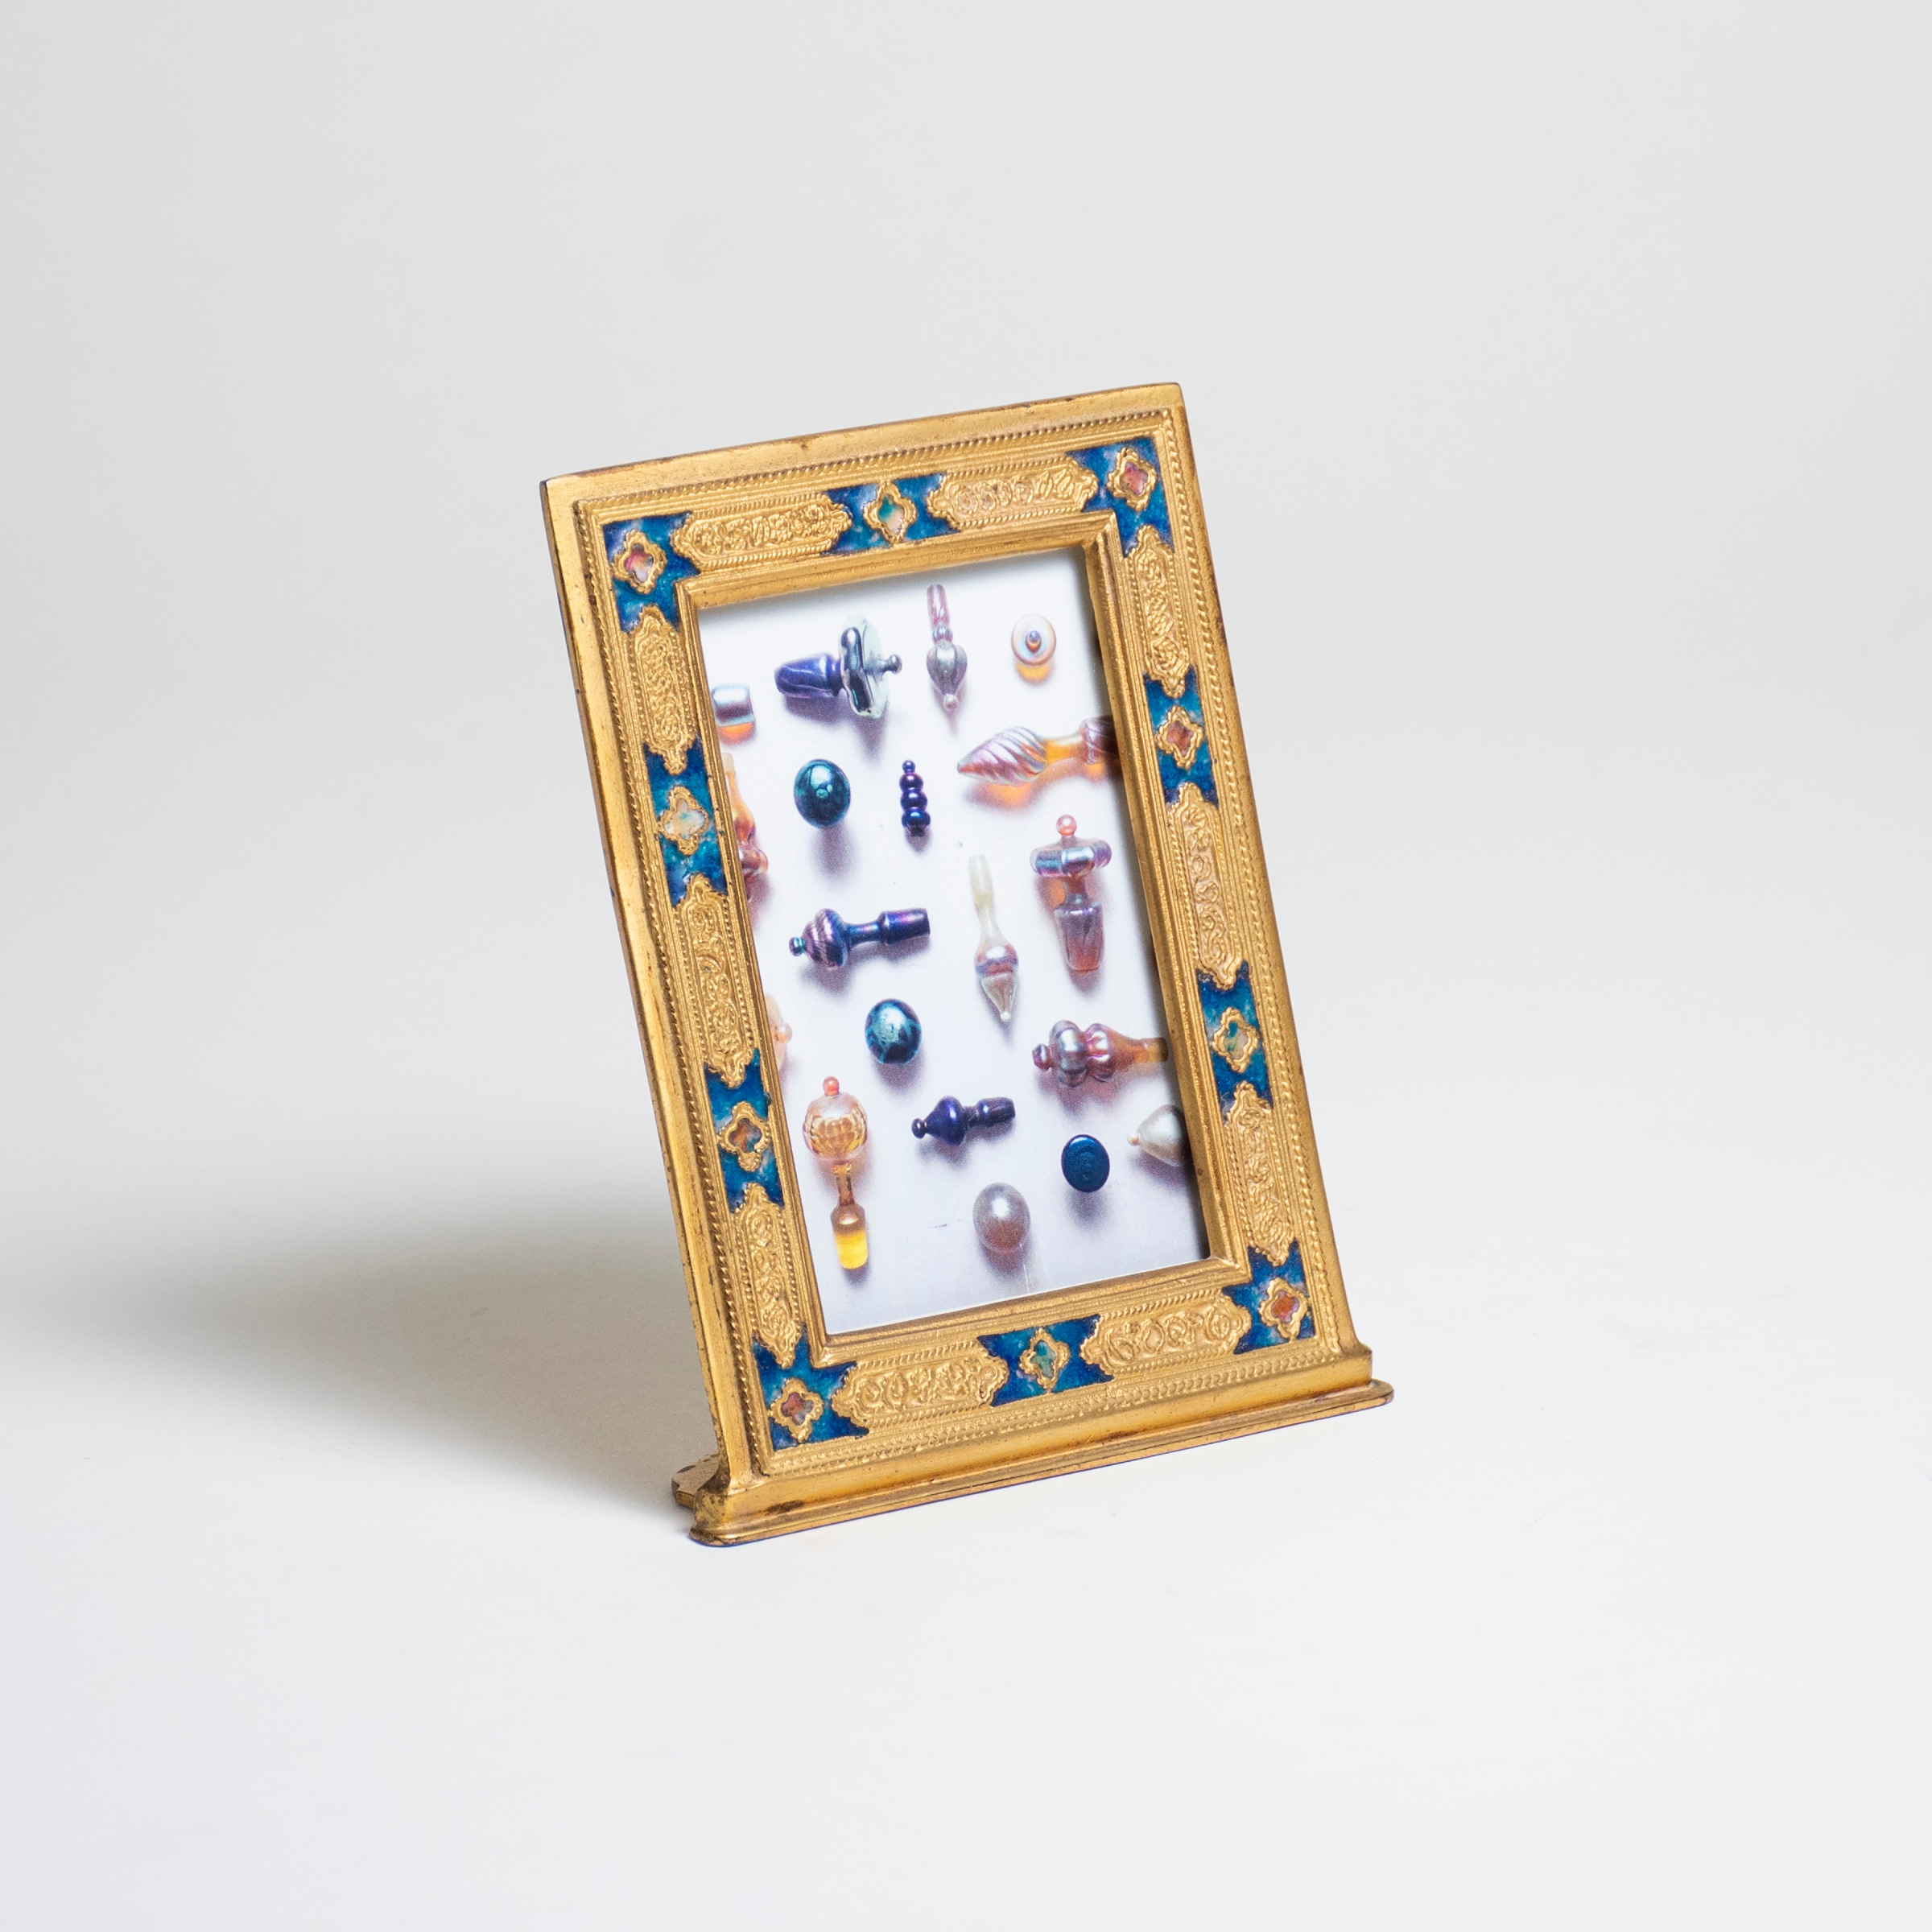 rare vertical calendar frame from the louis c tiffany furances desk set, gilded bronze with twisted wirework decoration and inset sapphire blue enamel